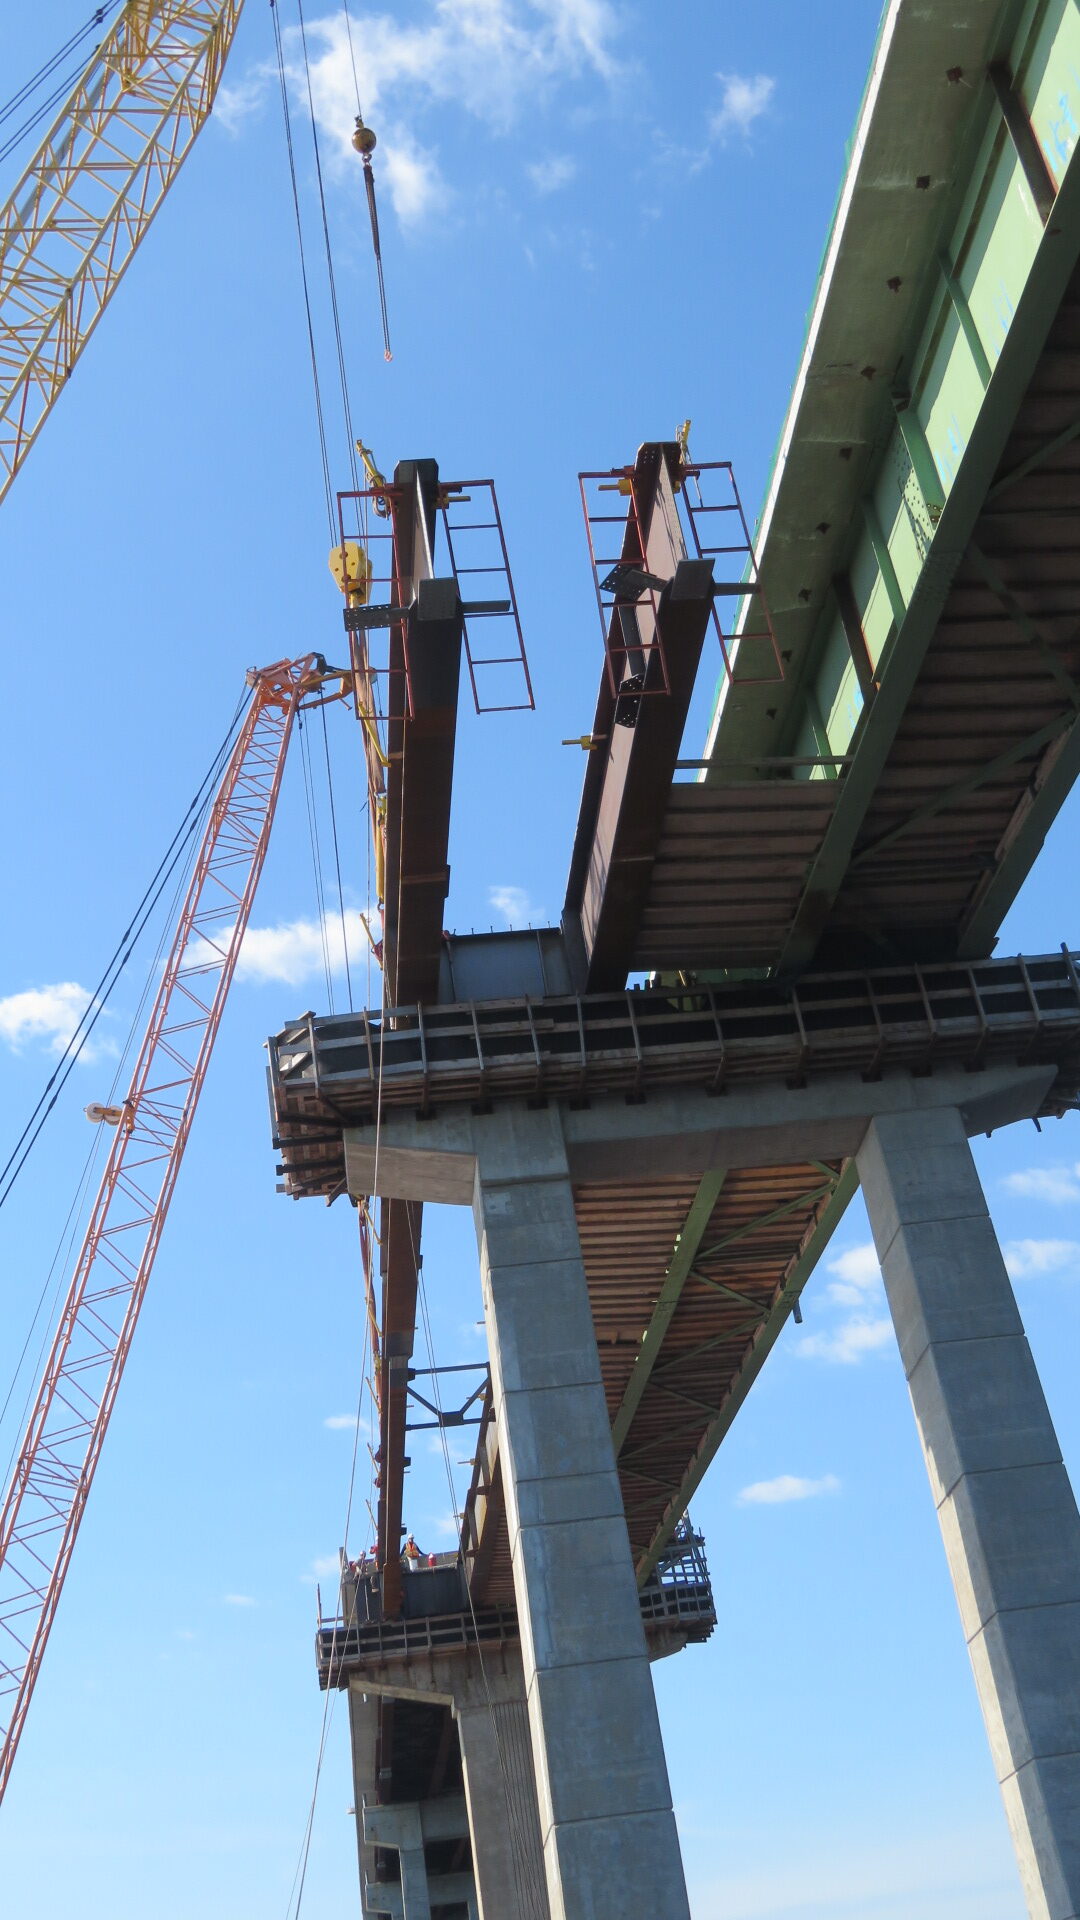 View from below of the first two girders